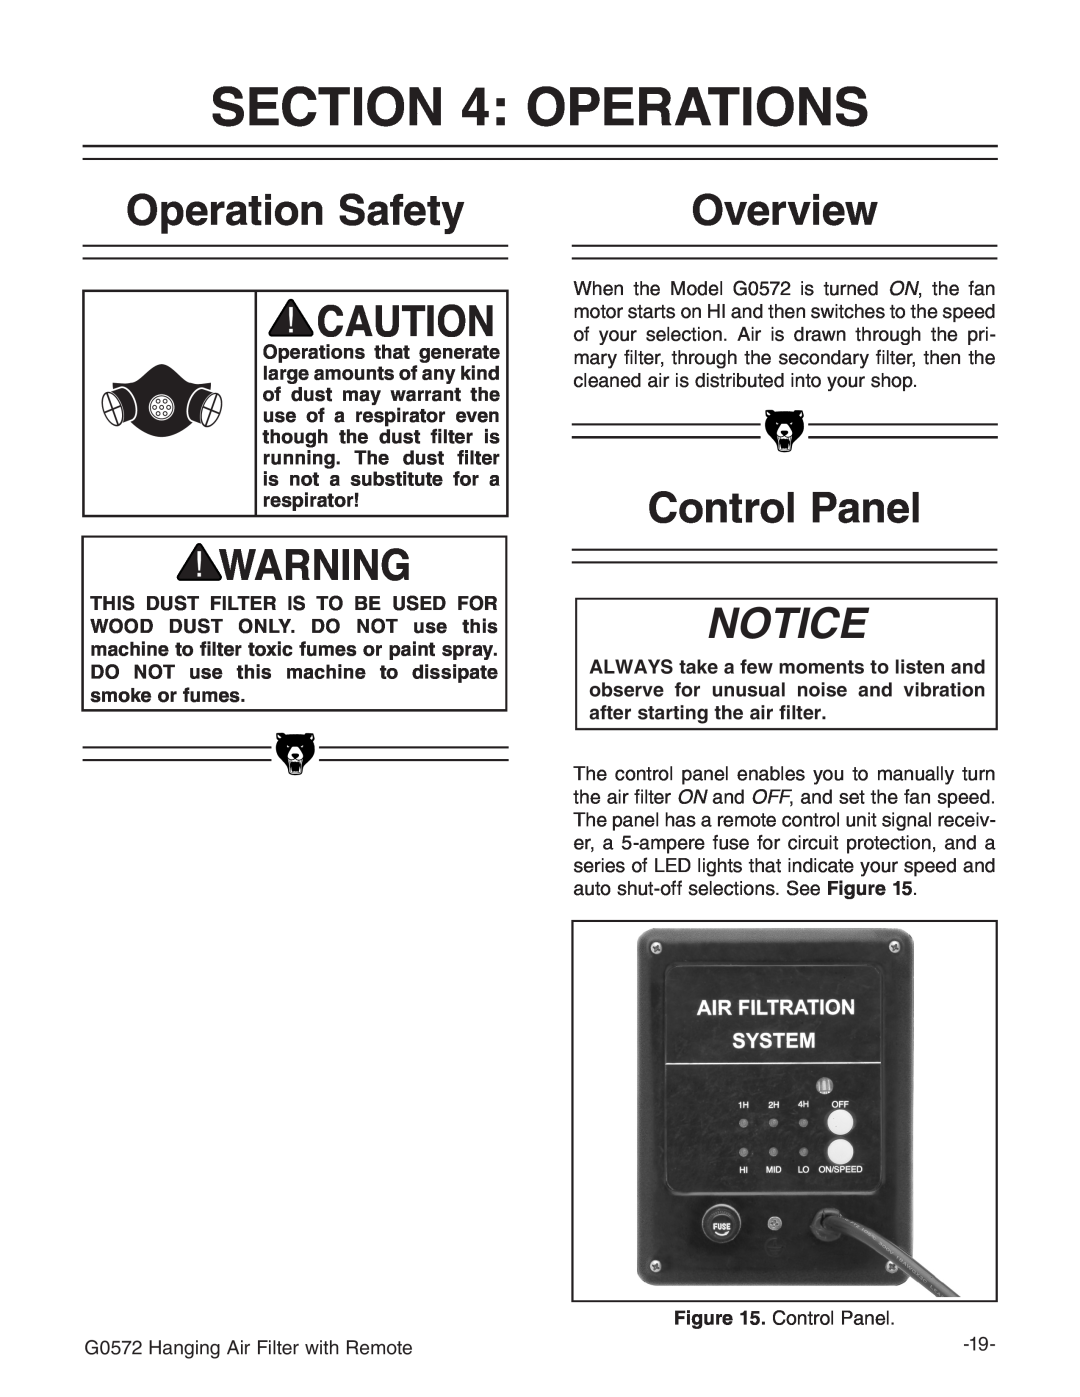 Grizzly G0572 instruction manual Operations, Operation Safety, Overview, Control Panel, Notice 